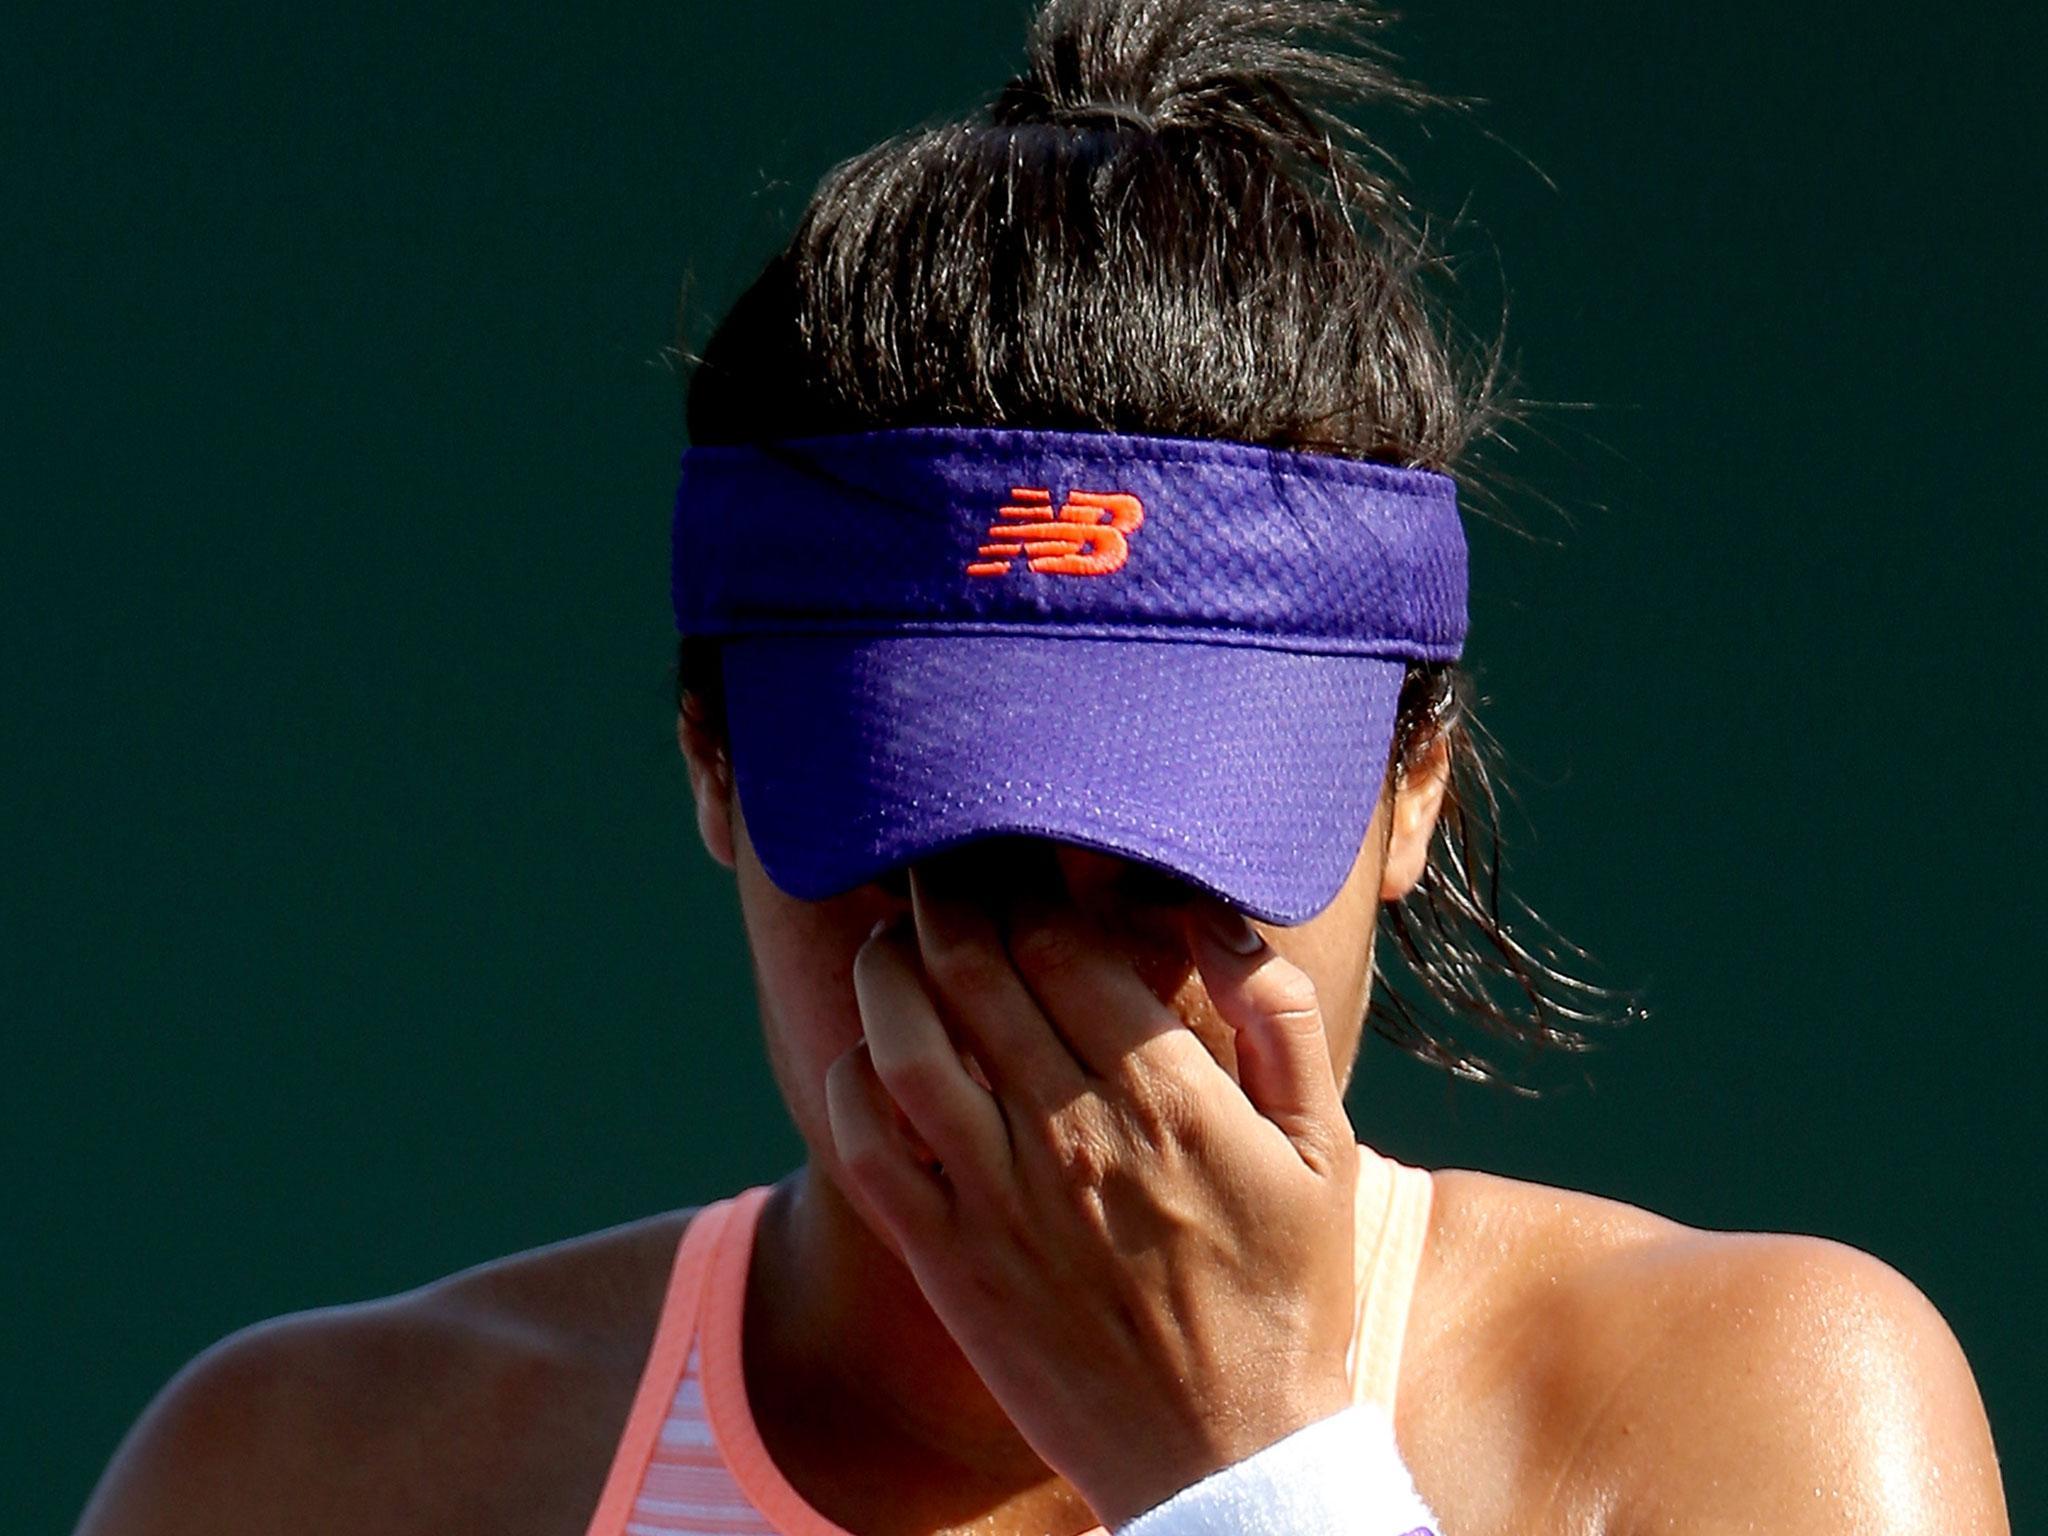 Heather Watson exited the tournament at the first round stage